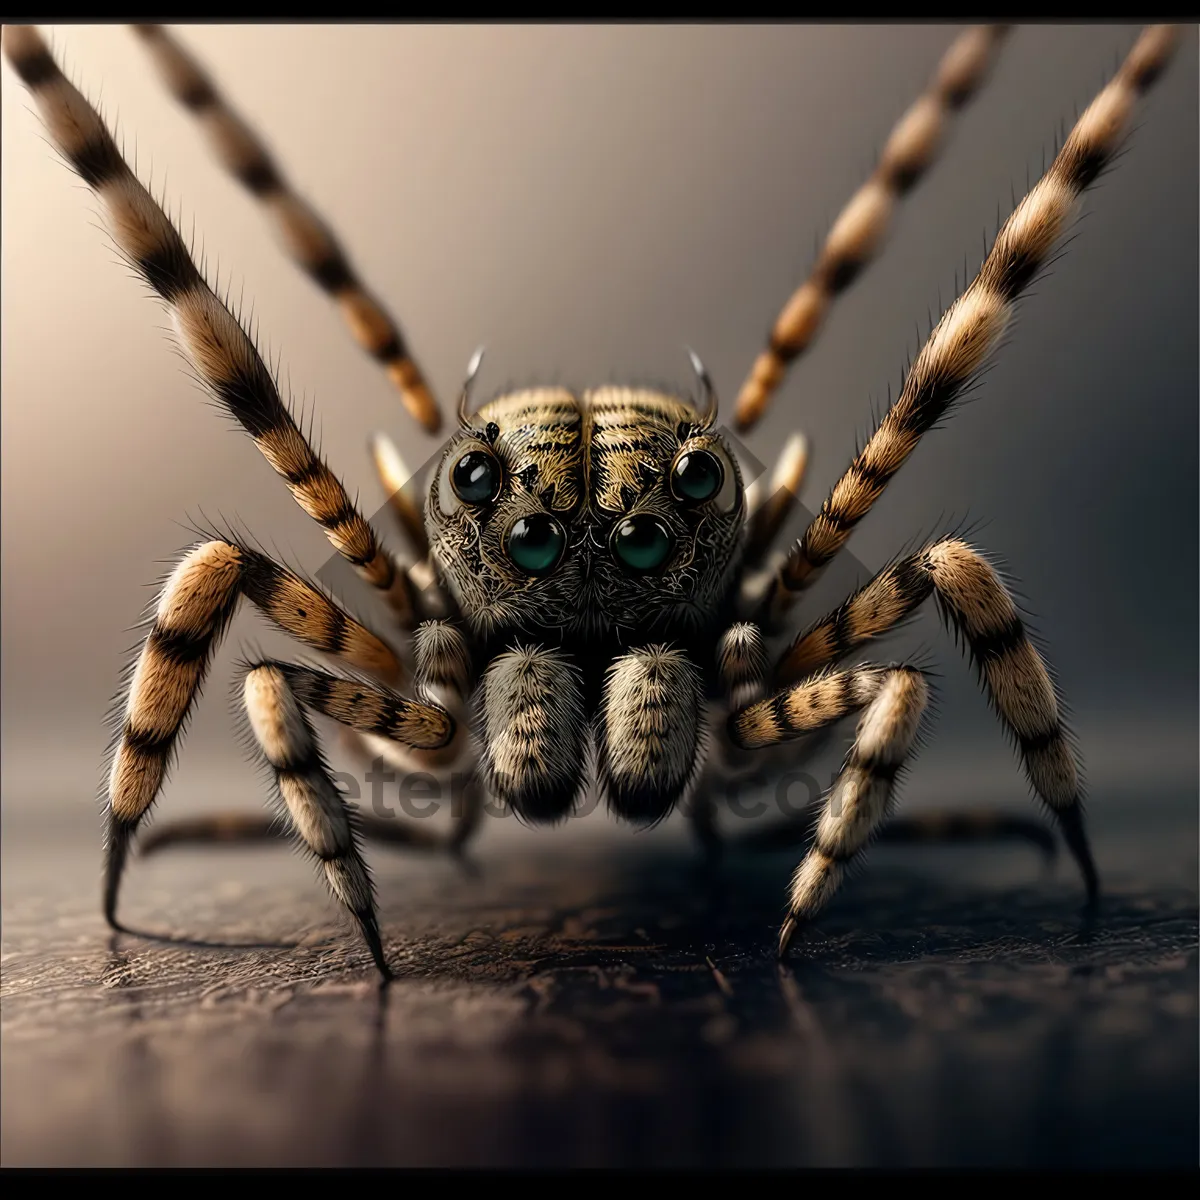 Picture of Black and Gold Garden Spider: Majestic Arachnid in Close View